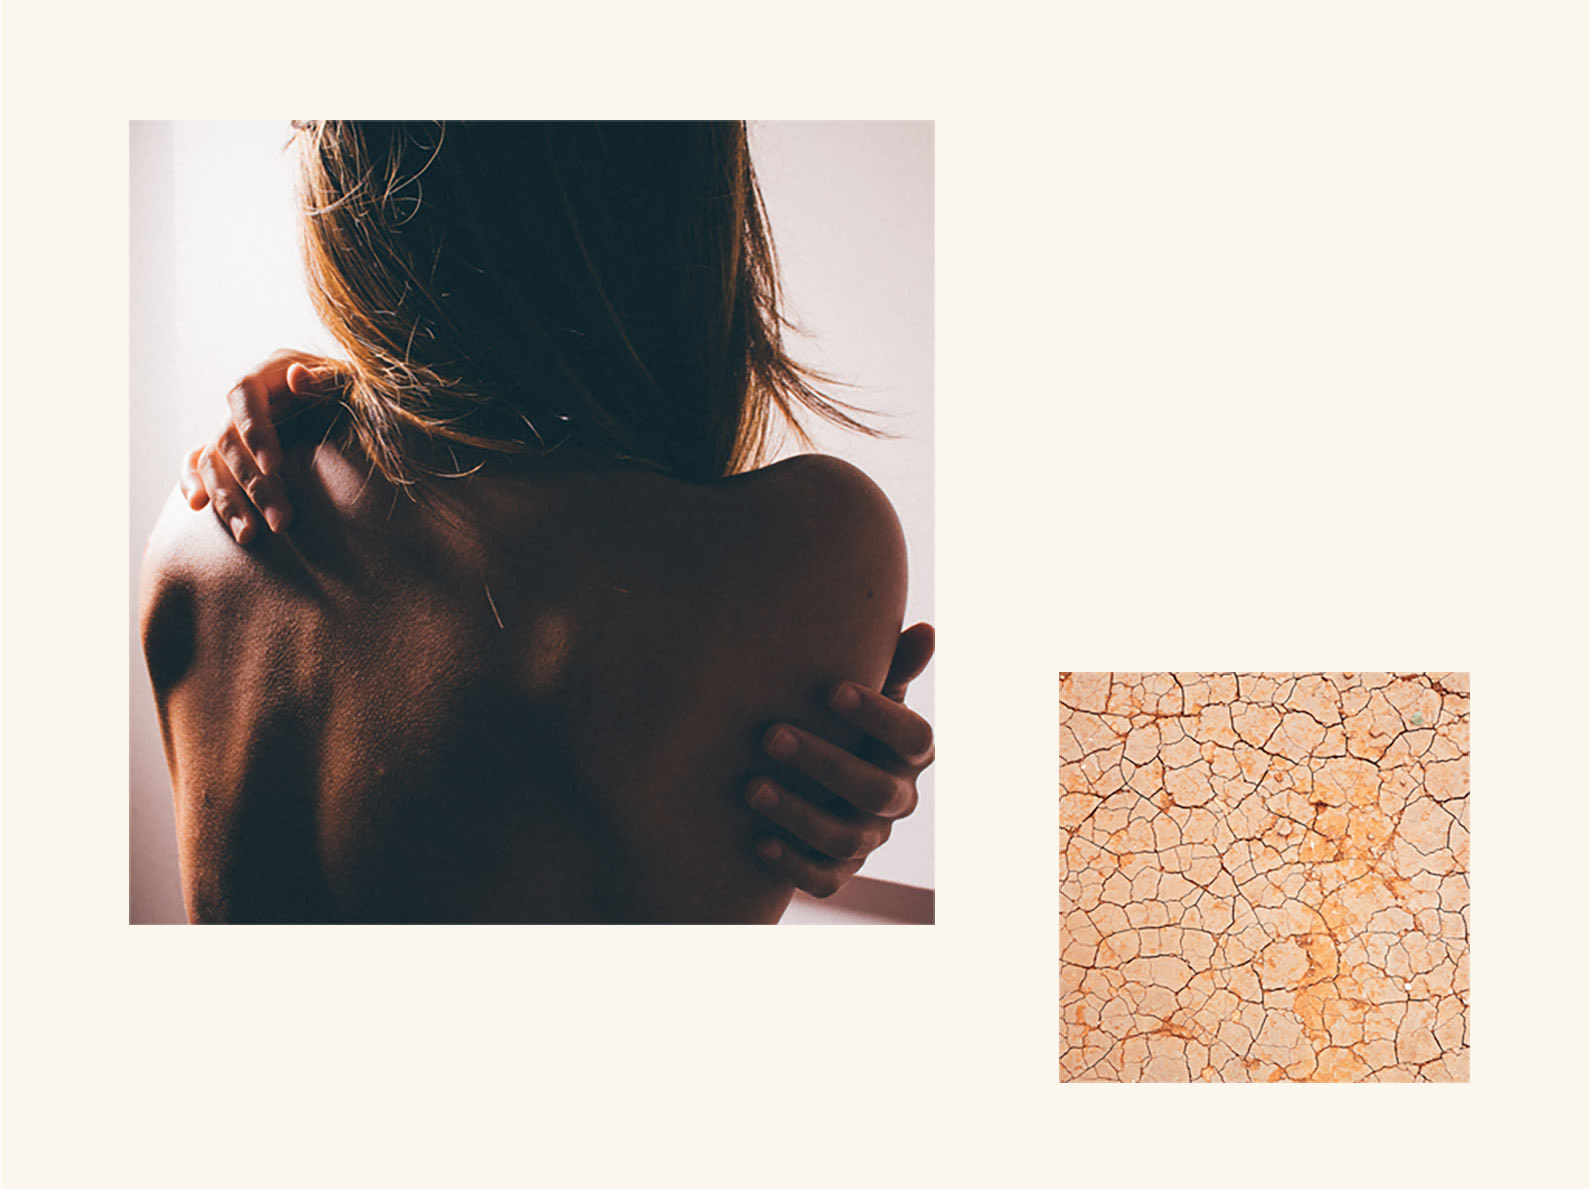 Woman's back showing her skin next to cracked desert sand.